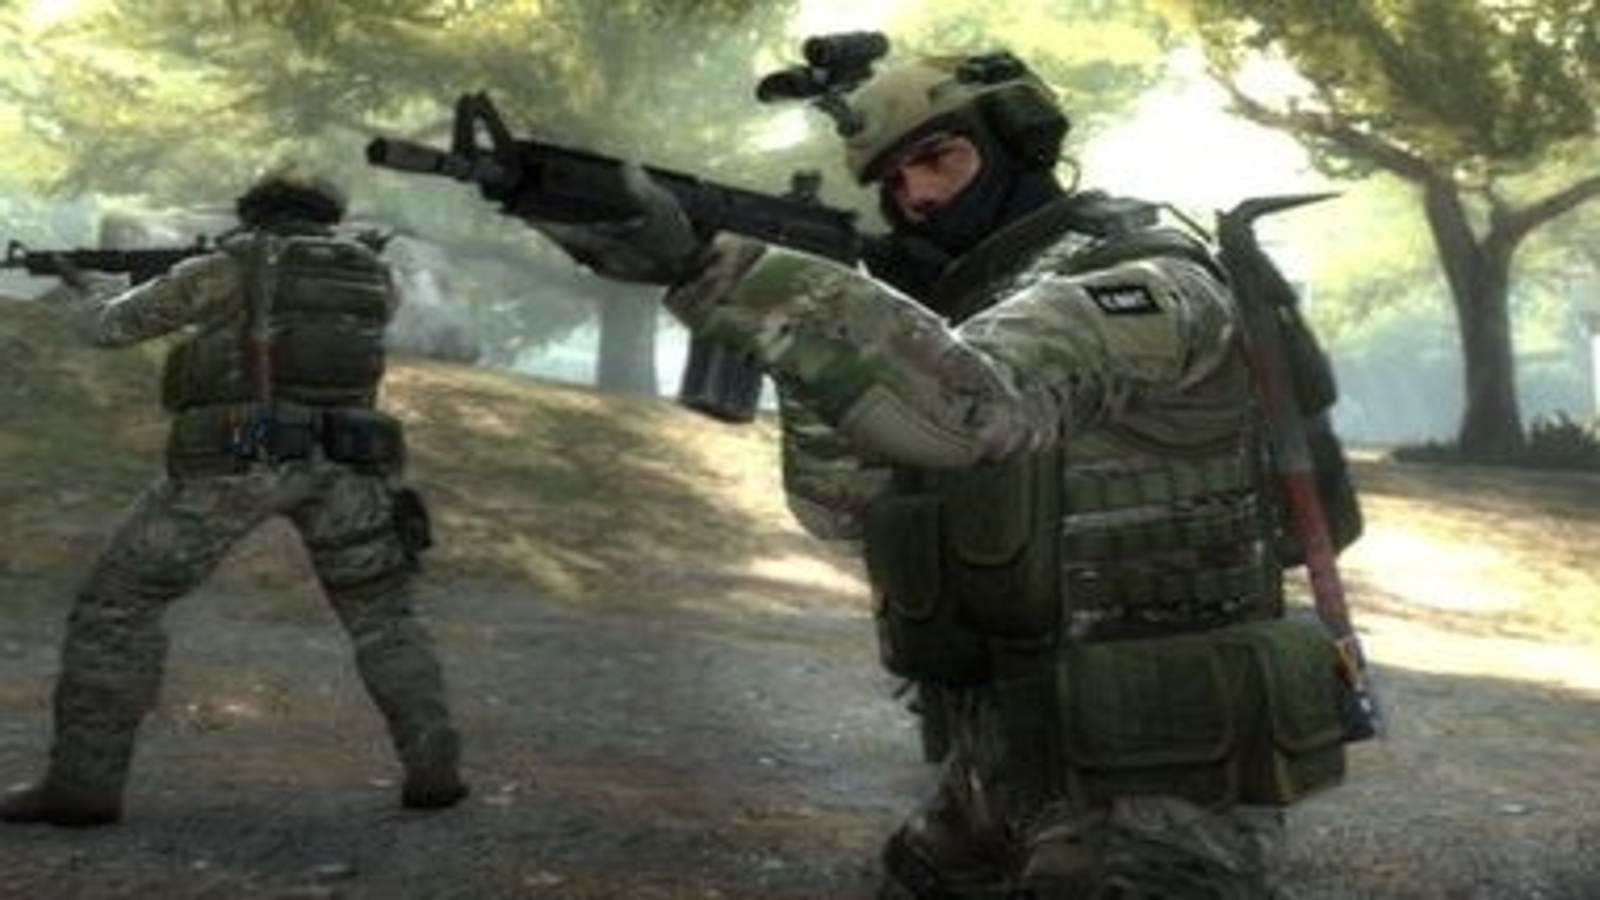 Counter Strike: Mobile Offensive Source Mod - Download